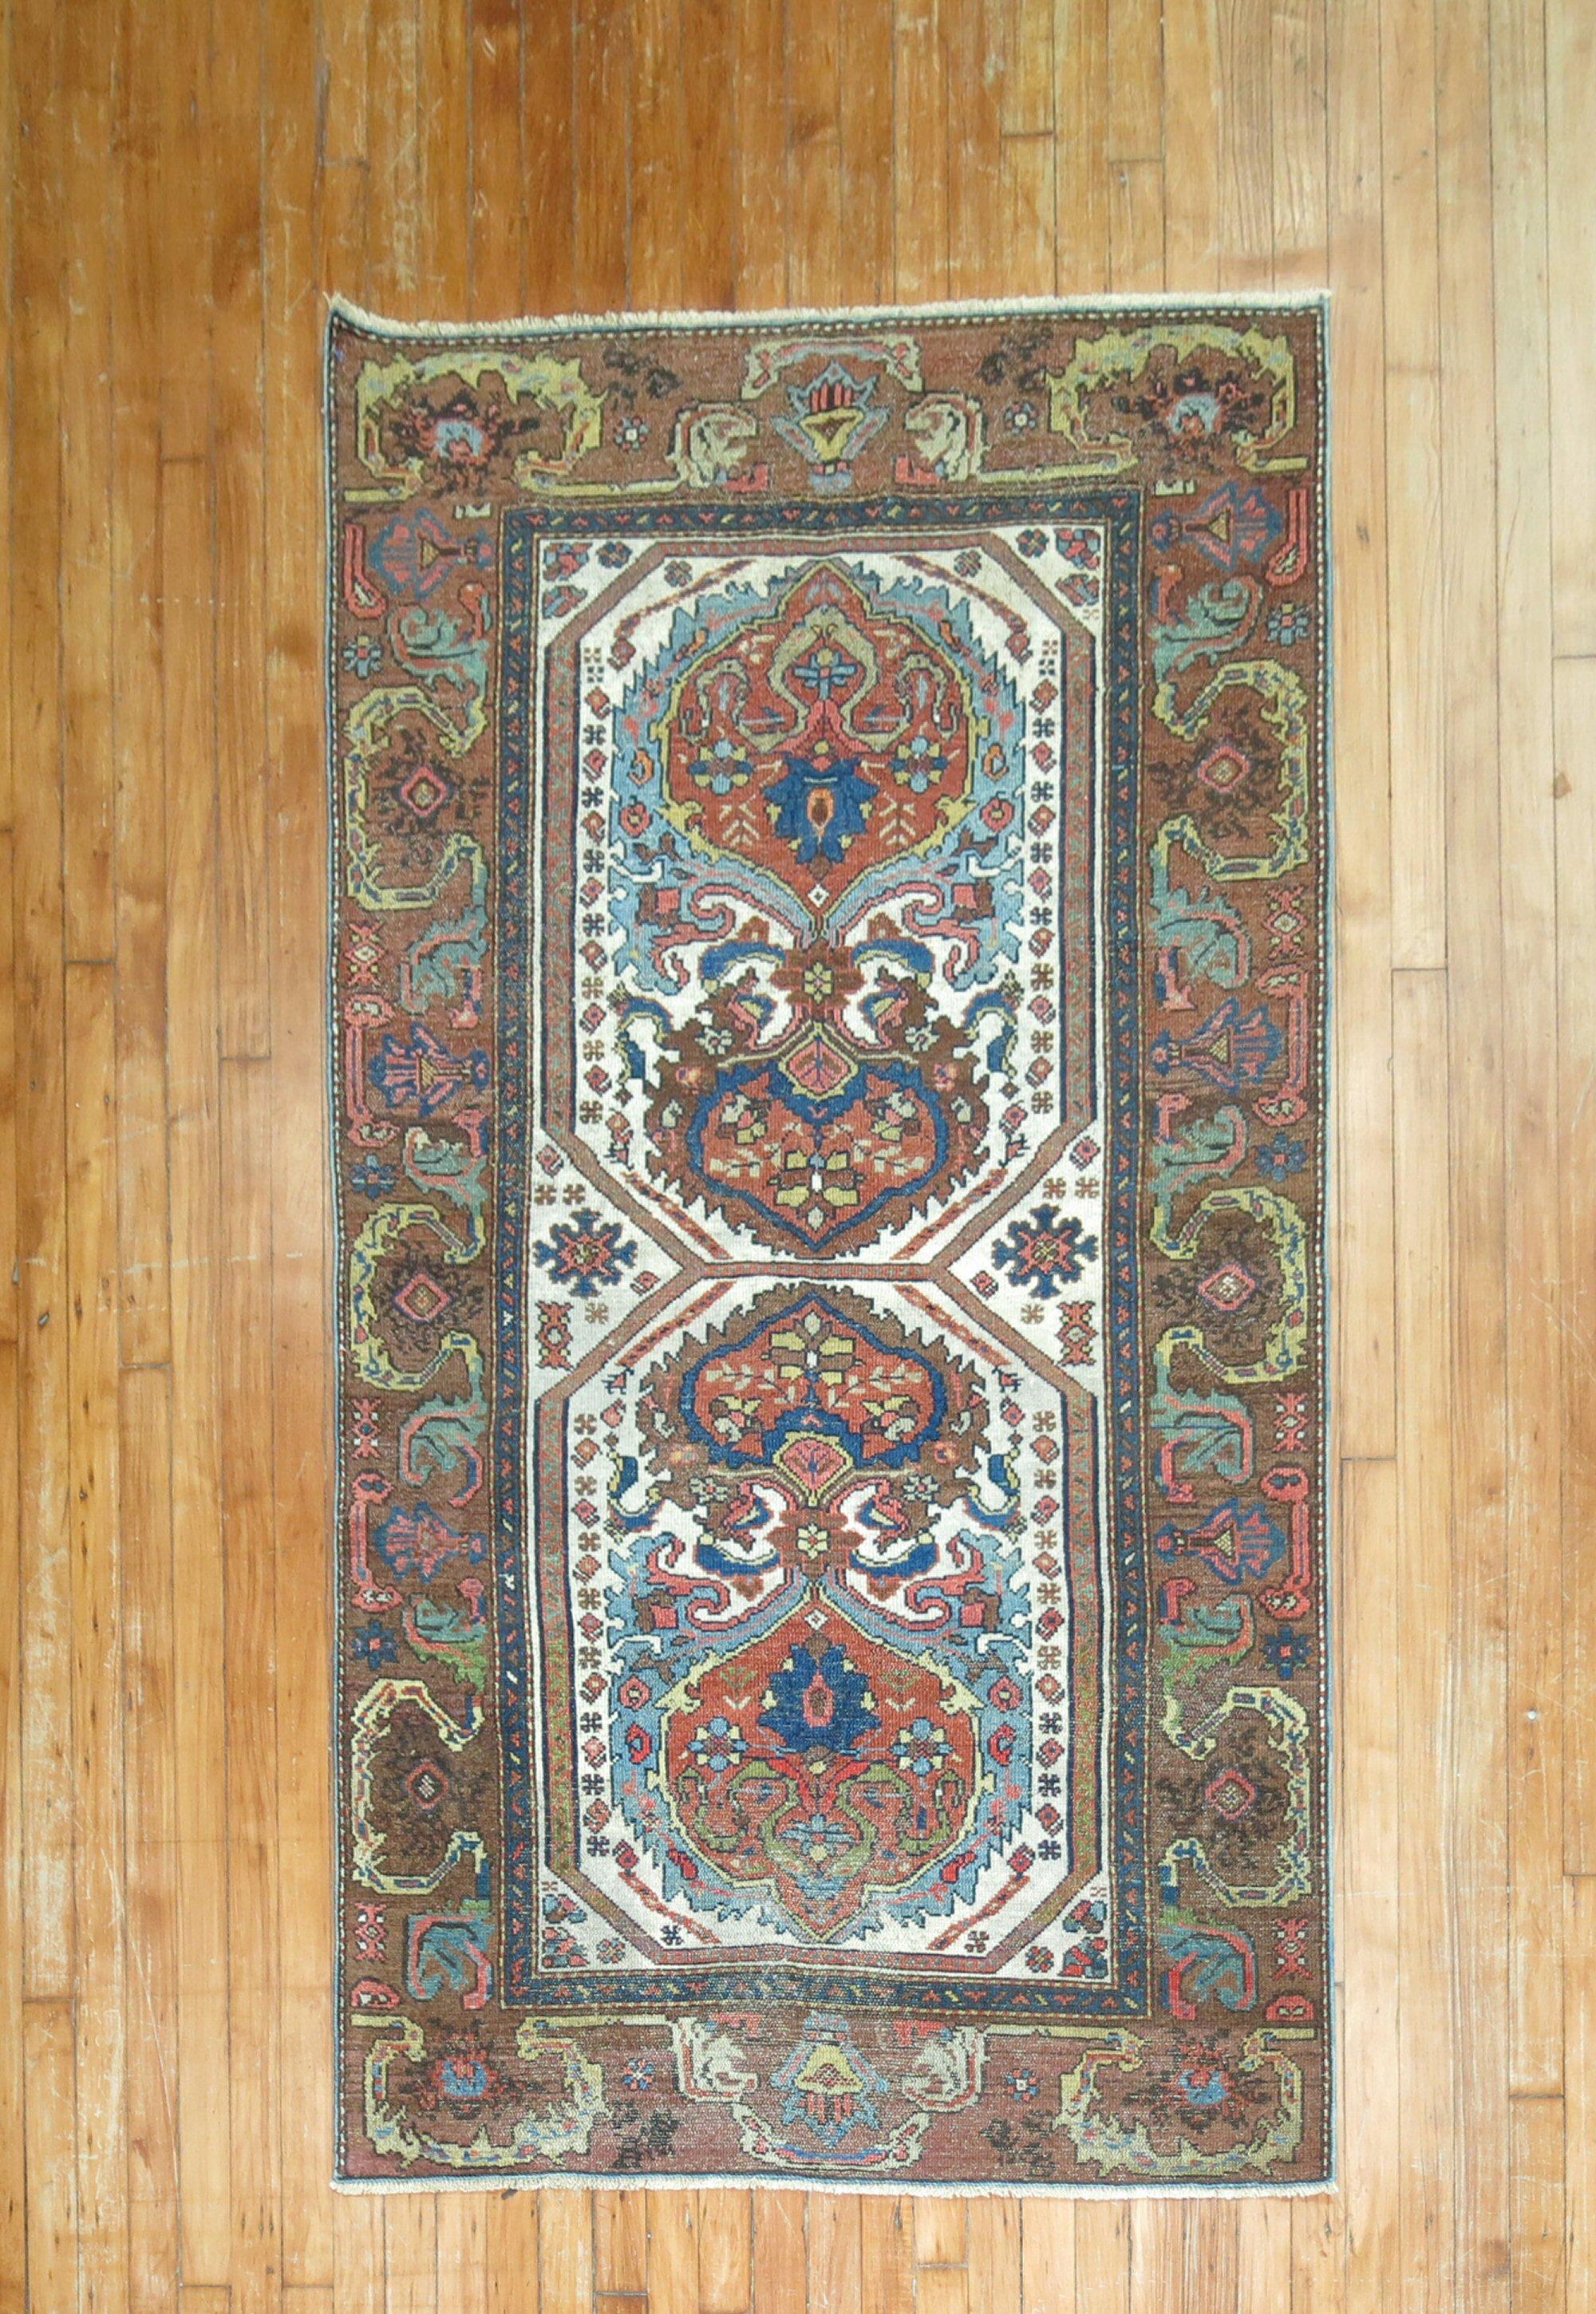 One-of-a-kind early-20th century decorative Malayer rug

Measures: 3'7'' x 6'4''.